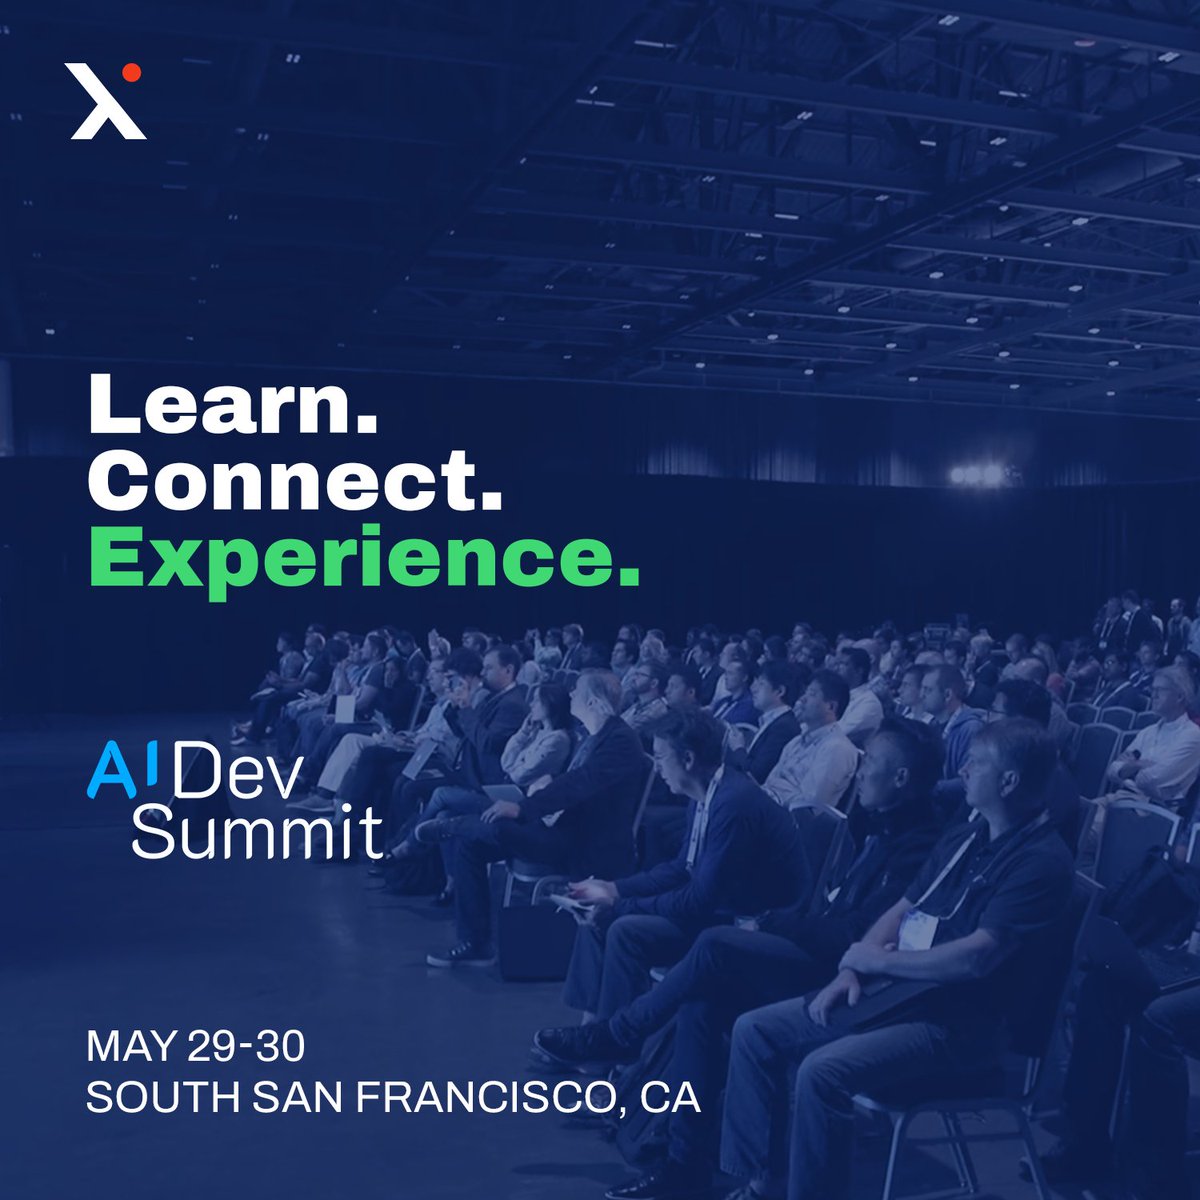 1/3 Exciting times ahead at the AI Dev Summit! | May 29-30, 2024 · South San Francisco, CA

AI DevSummit is the World’s Leading AI Developer & Engineering Conference with tracks covering chatbots, machine learning, open source AI libraries, AI for the enterprise, and deep...